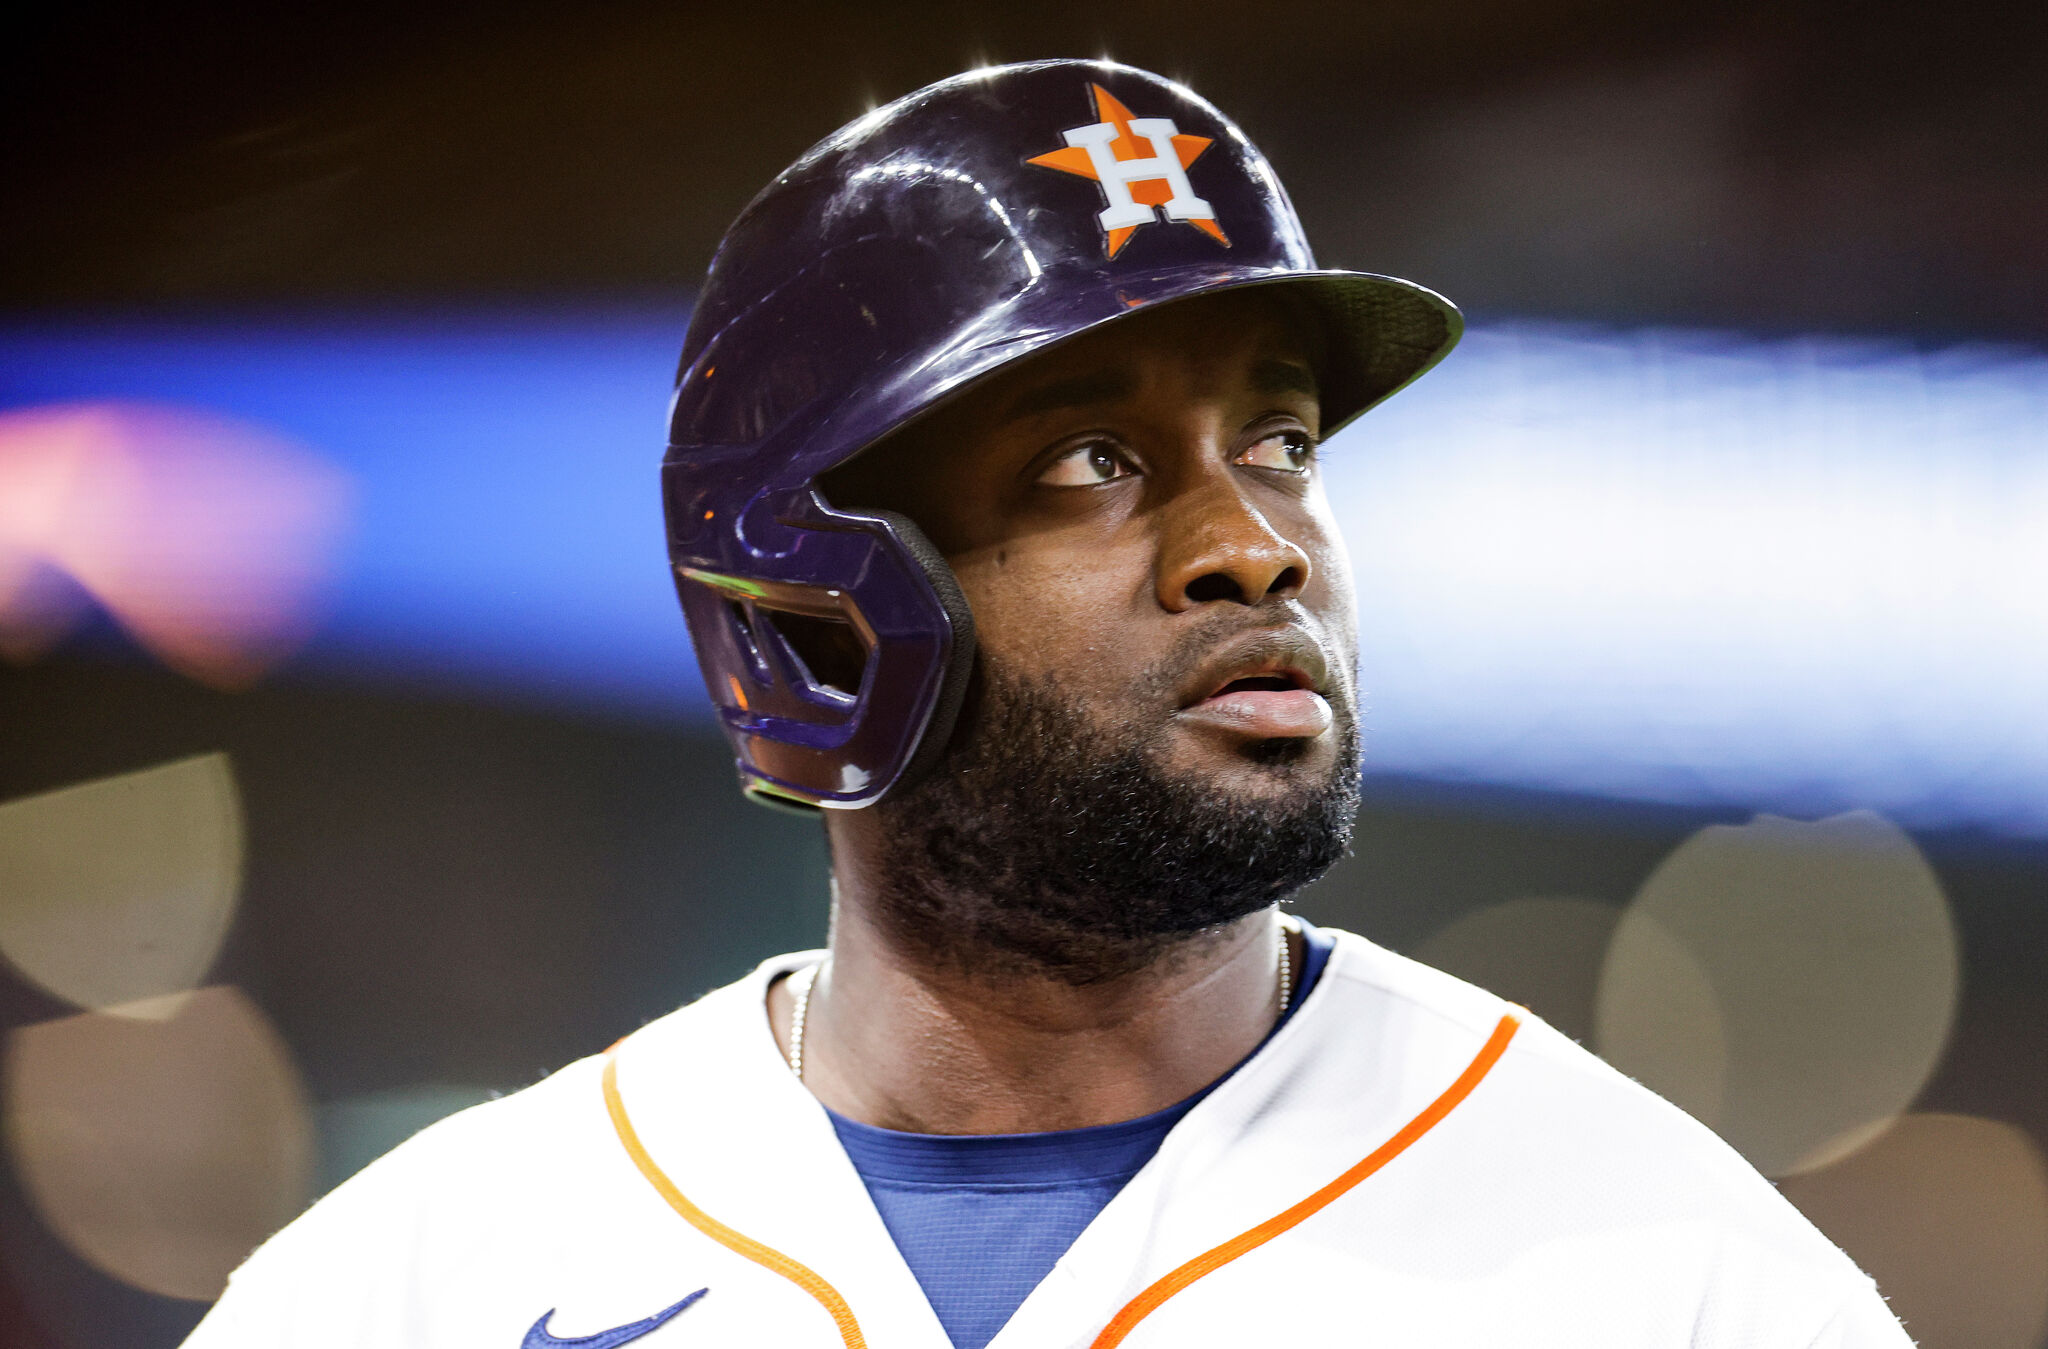 MLB - Staying in Space City. Yordan Alvarez and the